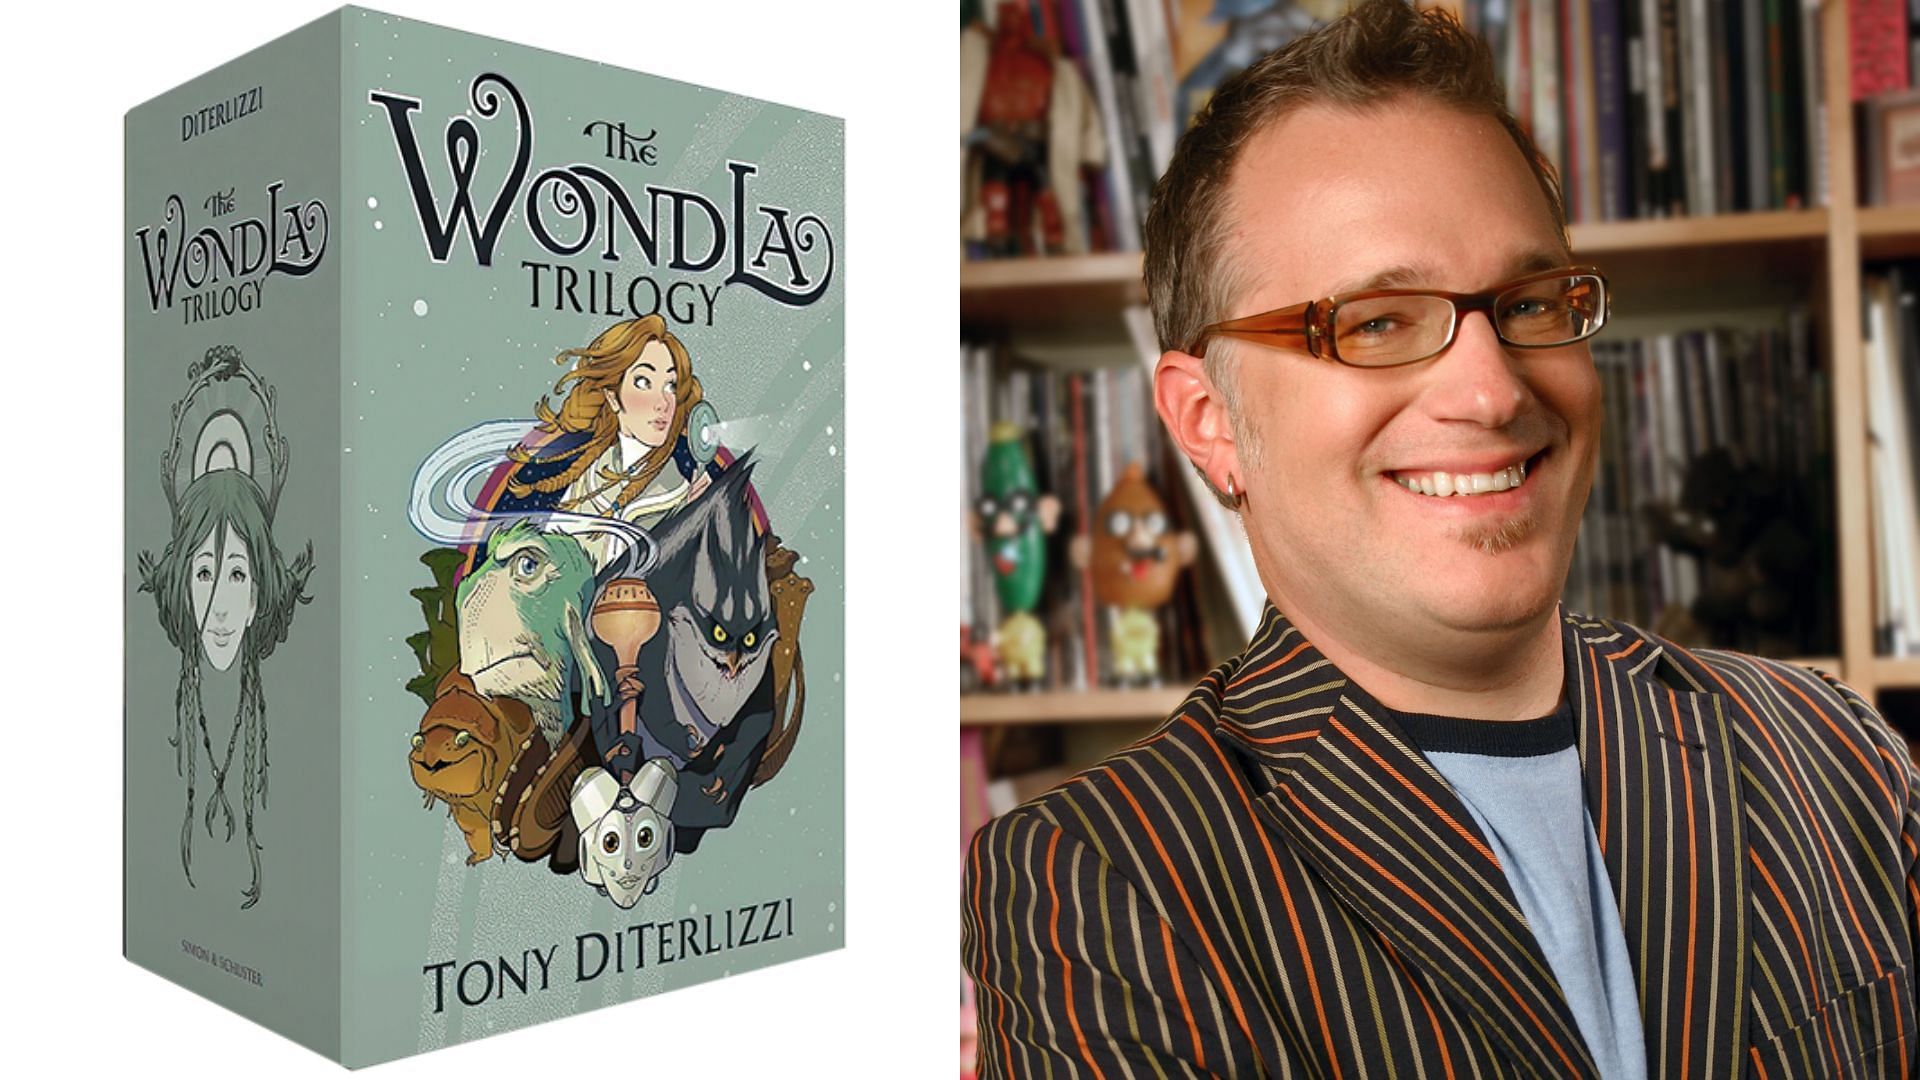 The Search for WondLa by Tony DiTerlizzi was published in 2010 (Image via Tony DiTerlizzi Official Website)